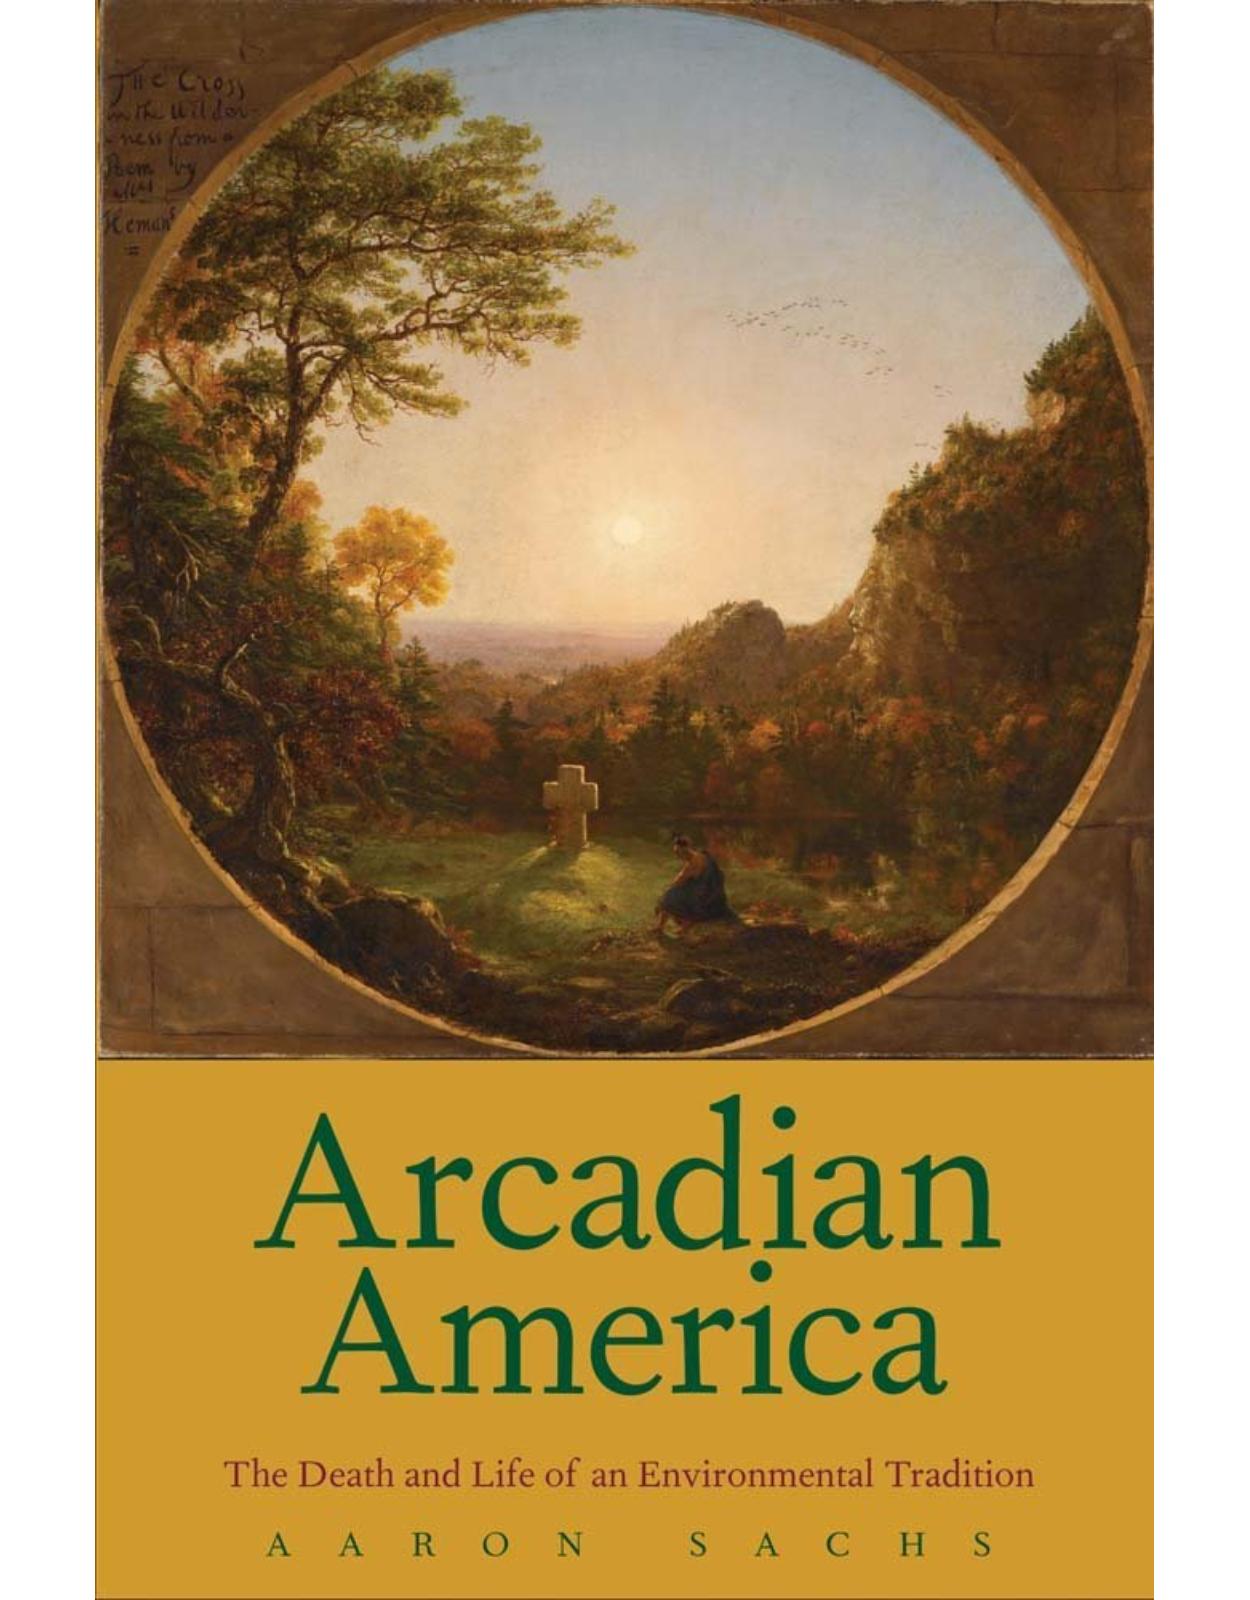 Arcadian America. The Death and Life of an Environmental Tradition